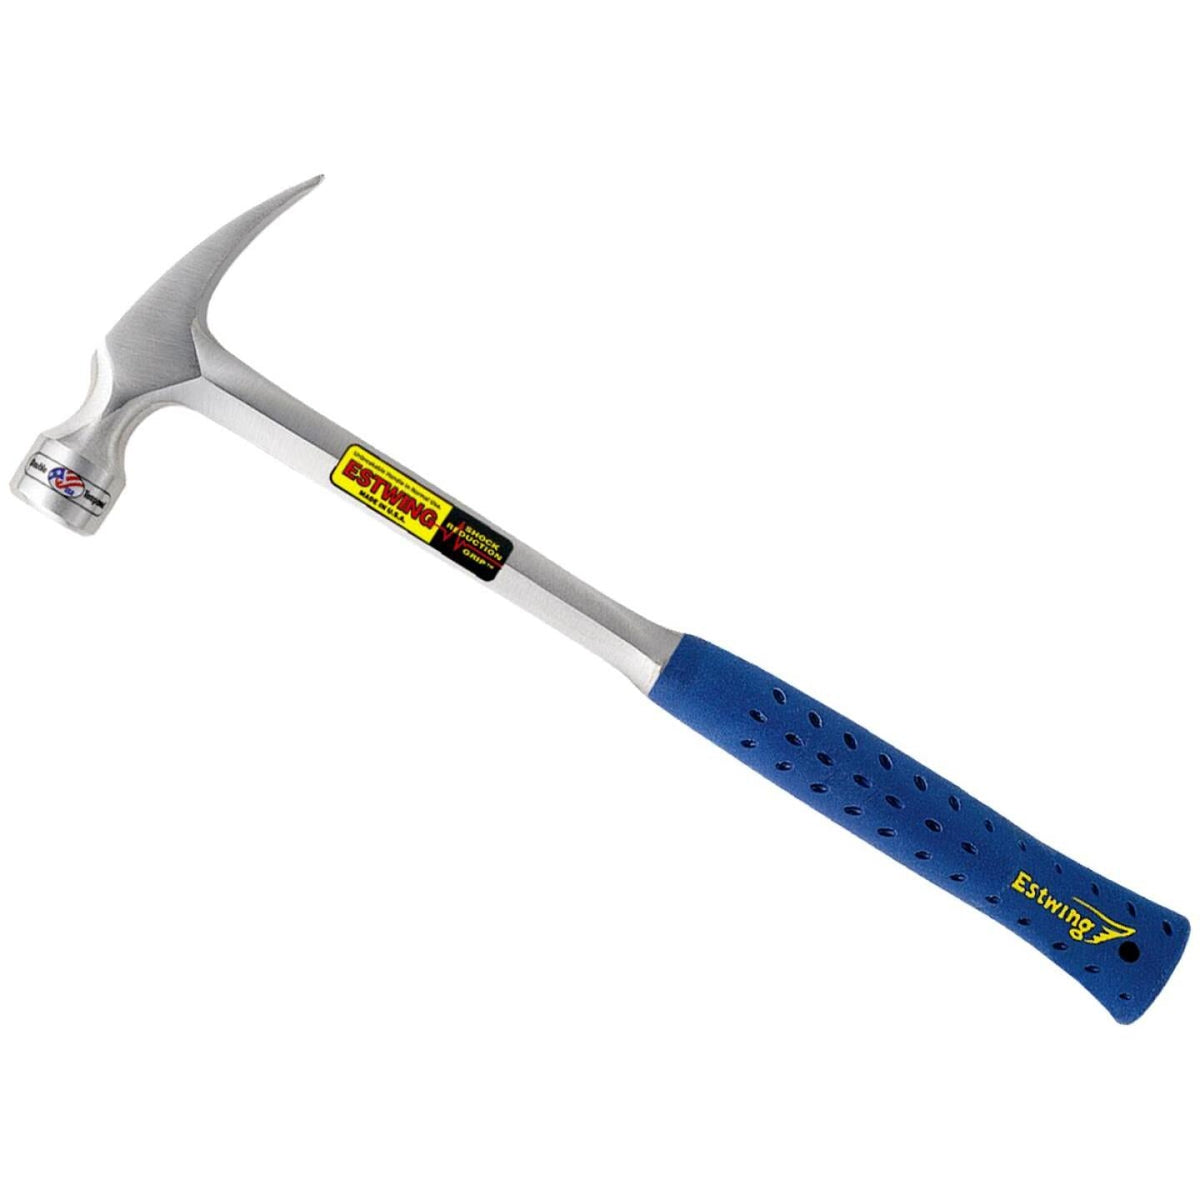 Estwing 22 Oz. Smooth-Face Rip Claw Hammer with Nylon-Covered Steel Handle  - Jefferson City, TN - Leeper Hardware